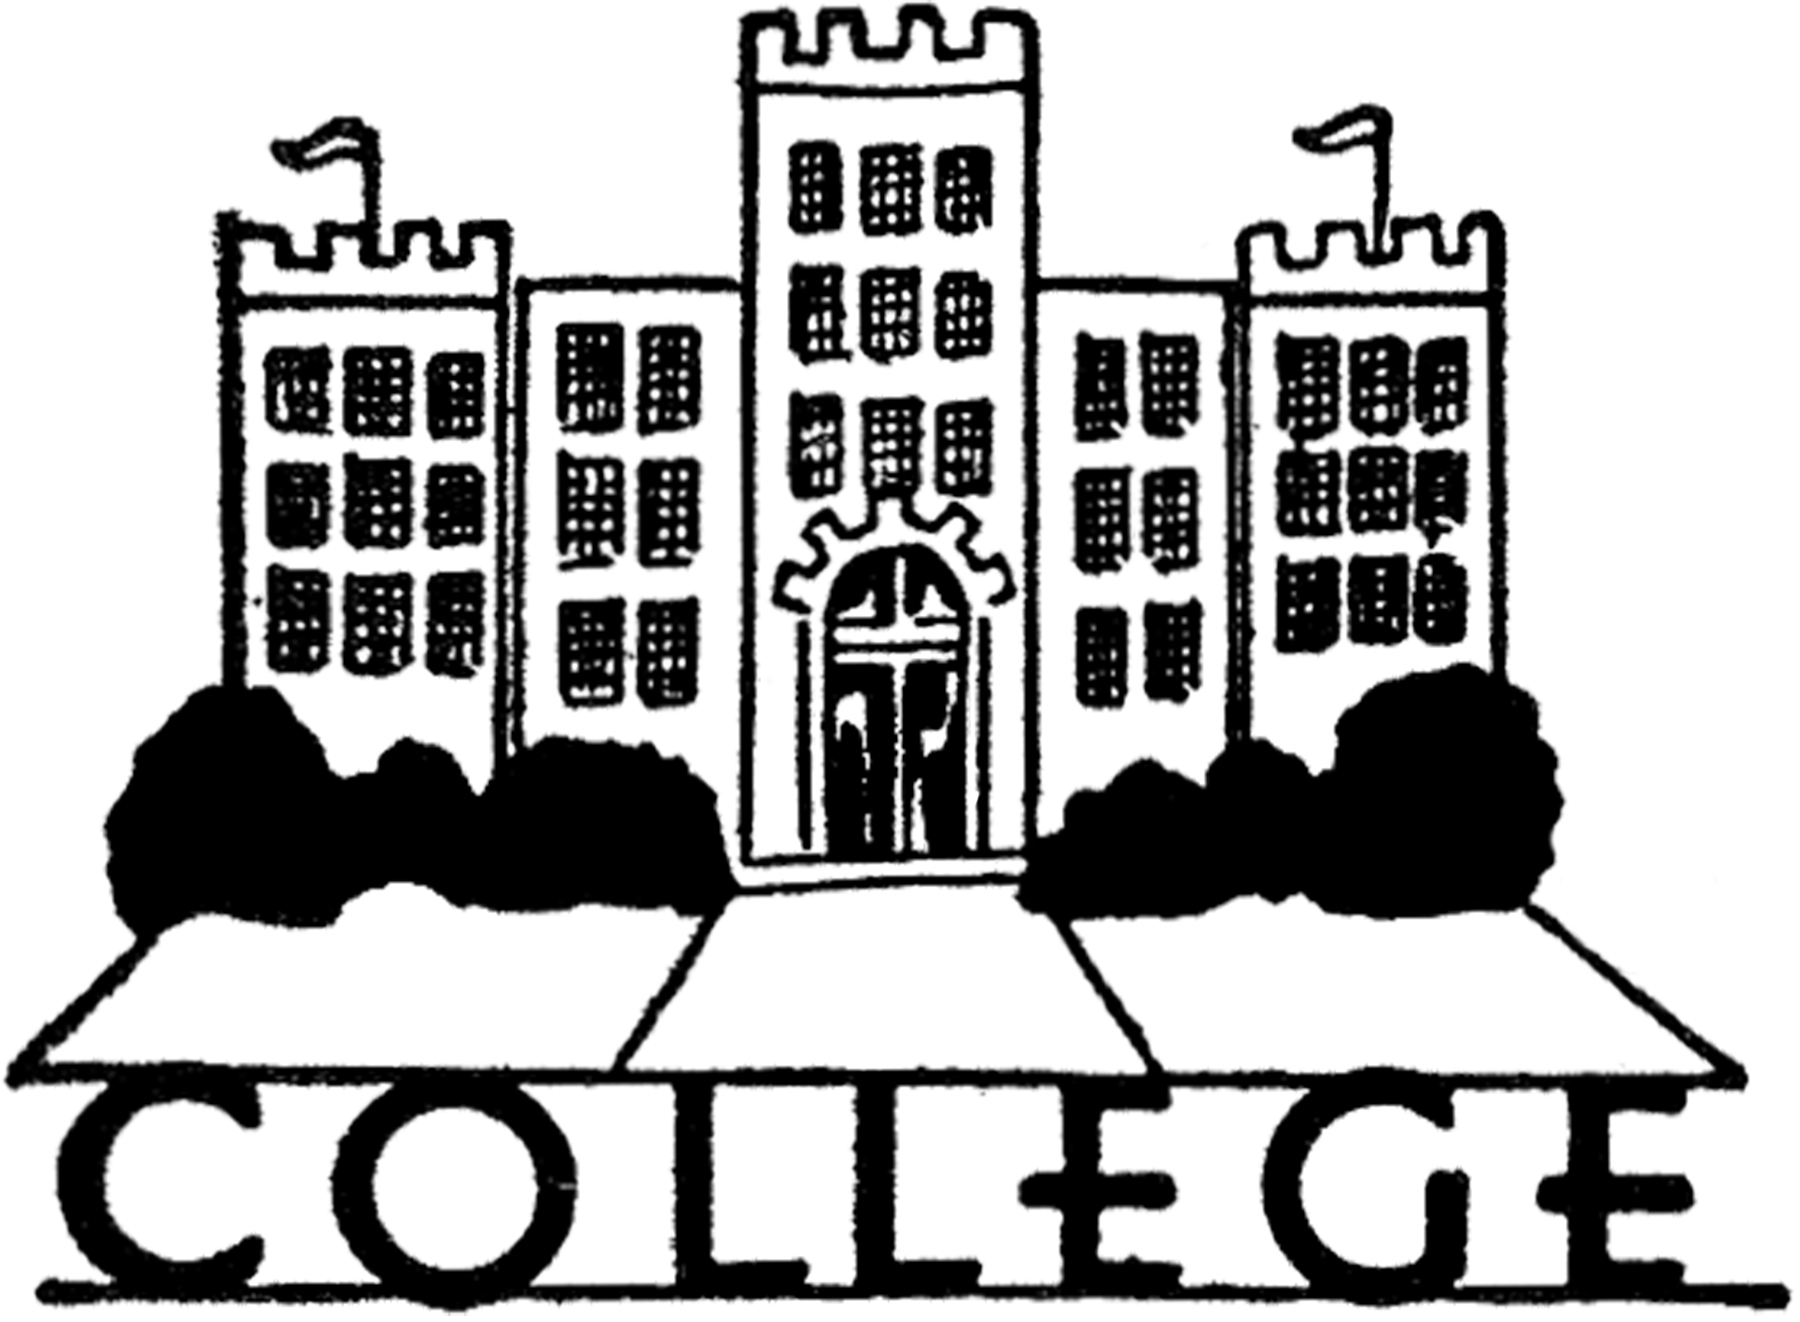 Vintage College Image! - The Graphics Fairy